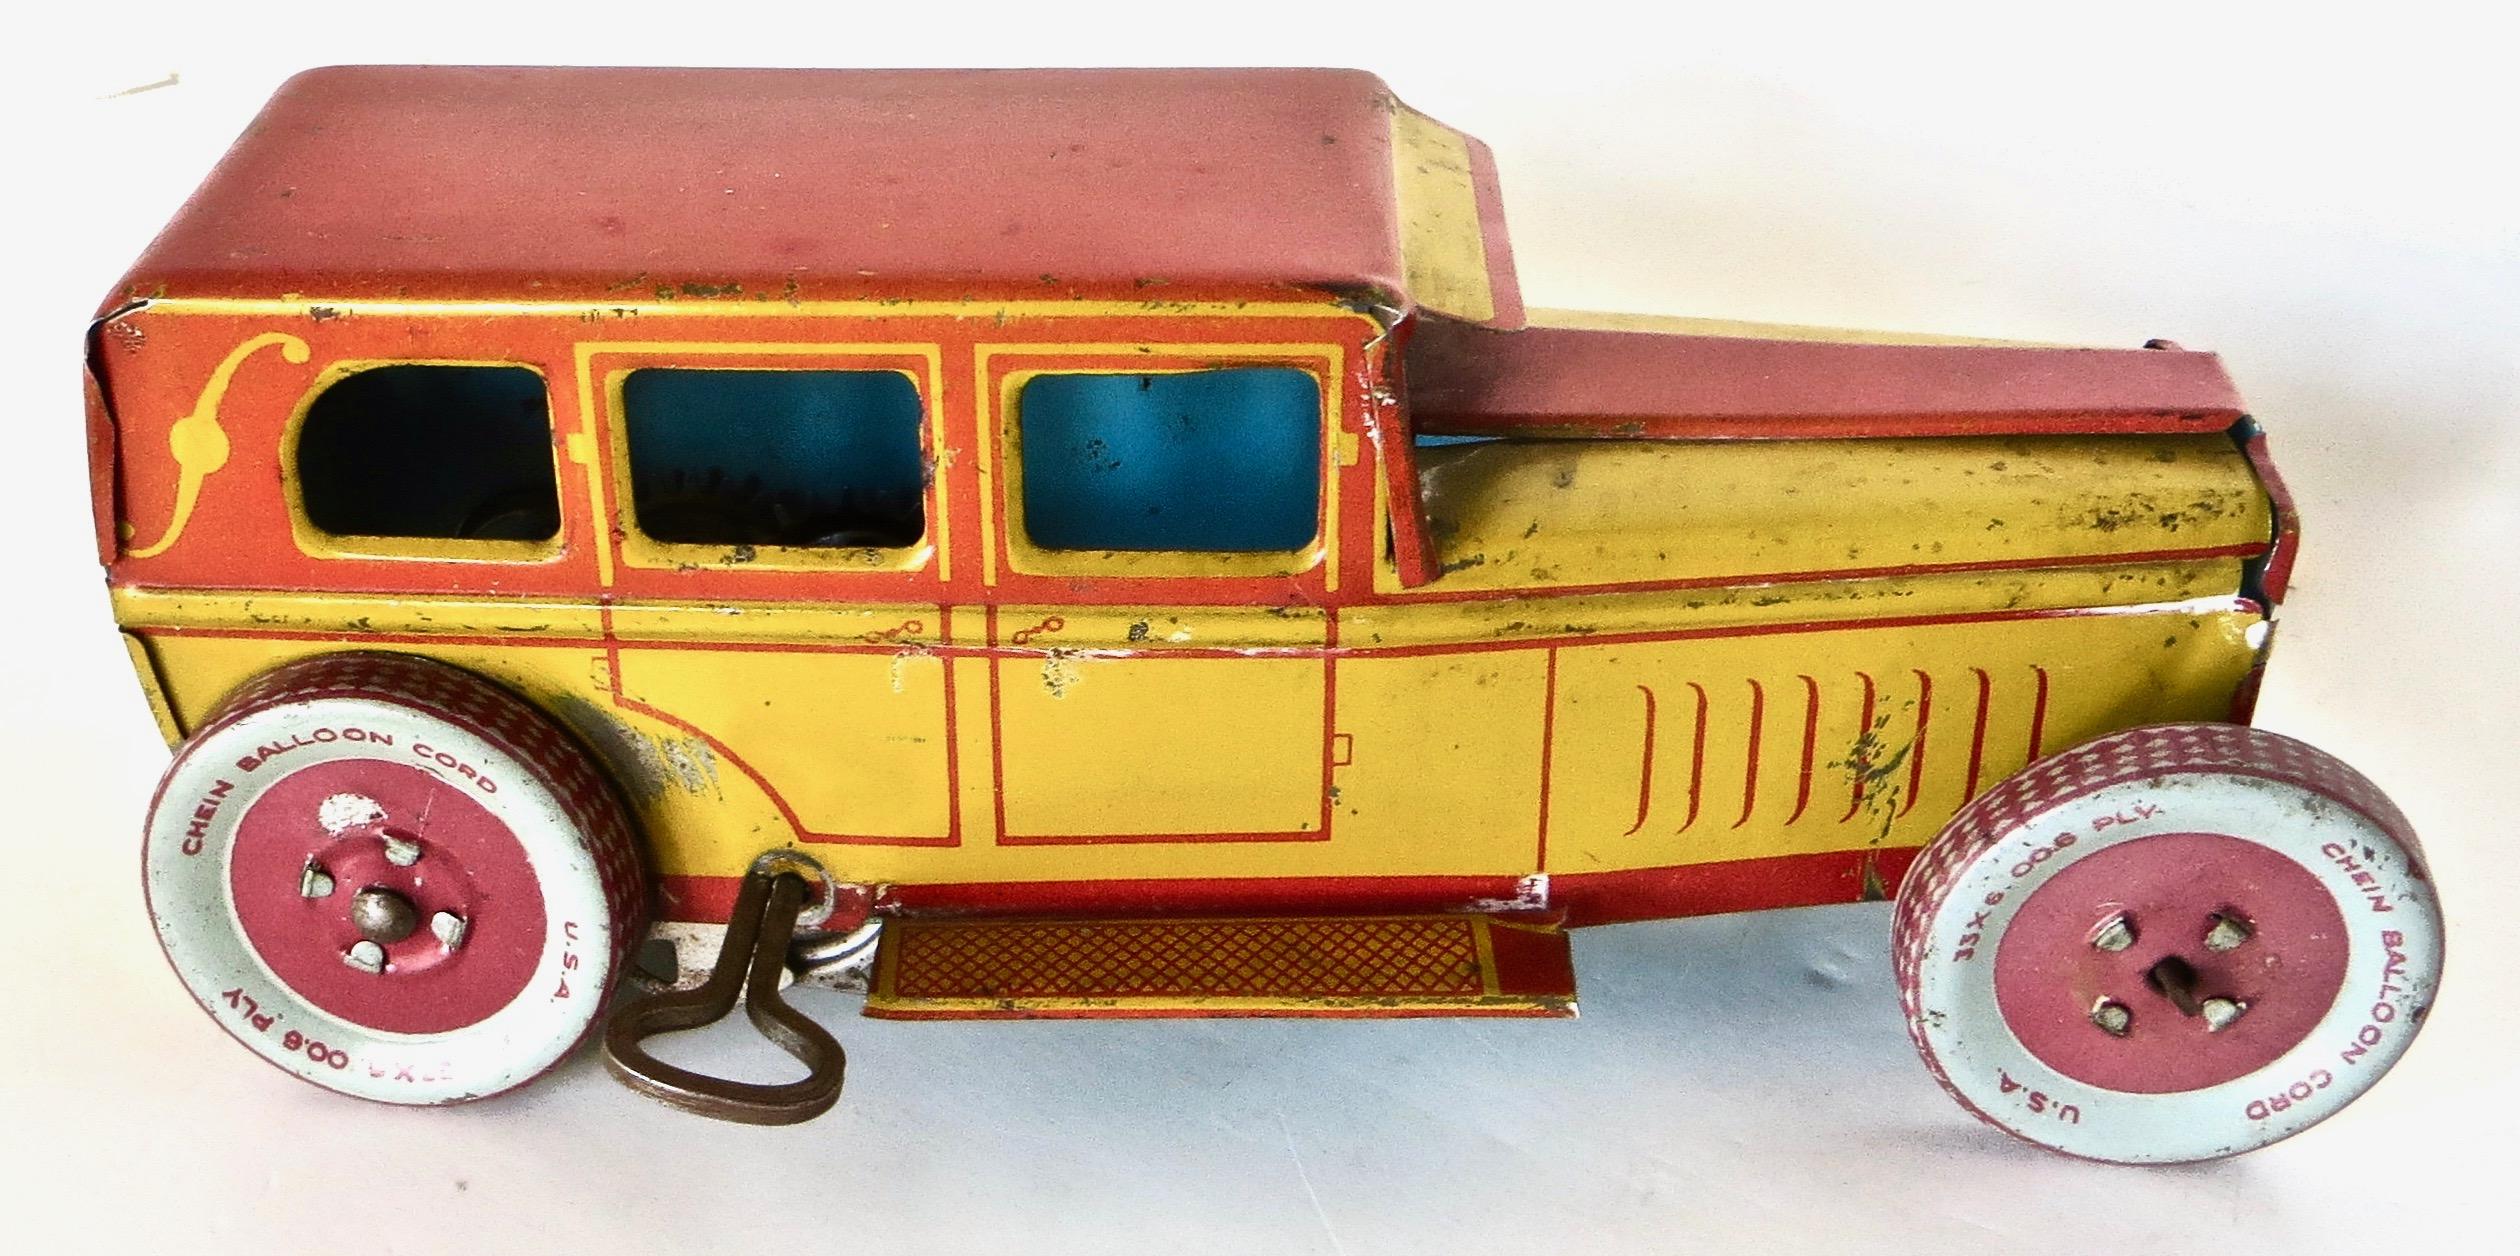 This is one of the earlier, New York City based, J. Chein Company, tin toy pieces. They started doing lithography in 1930.
This toy wind-up sedan was made circa 1930 and is brightly lithographed and painted in red and yellow, with grey and red